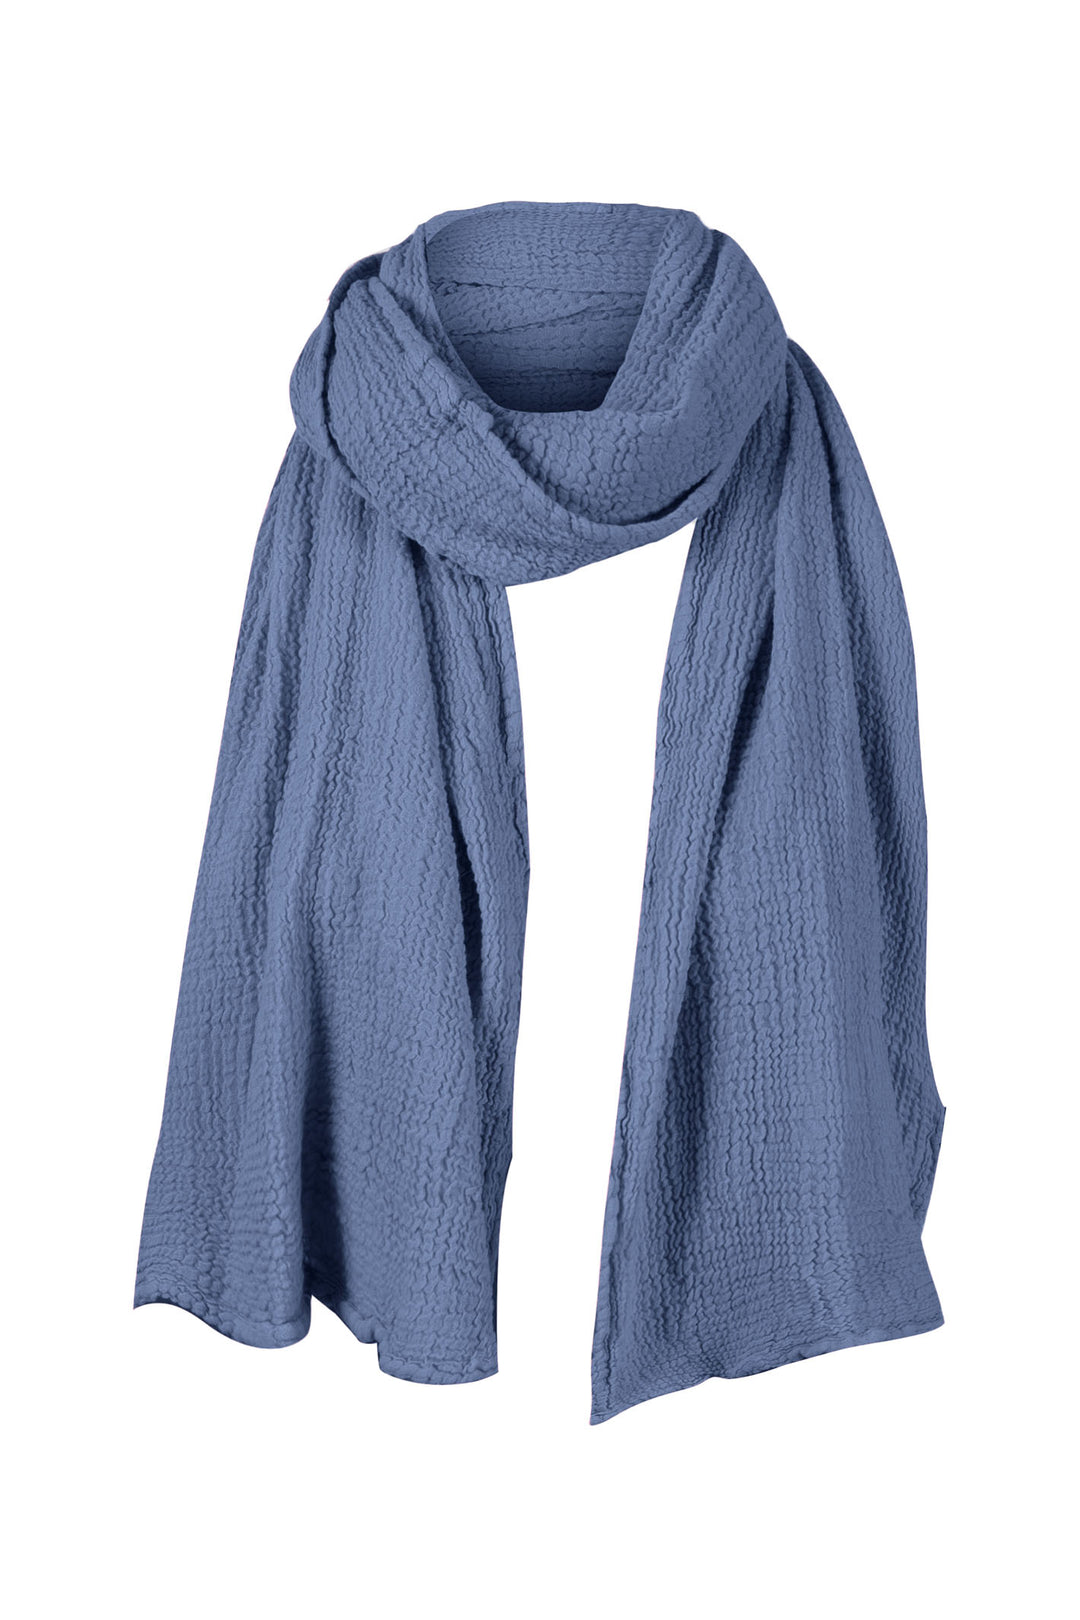 Onelife A523 Shawl Neptune Blue Cotton Shawl - Experience Boutique